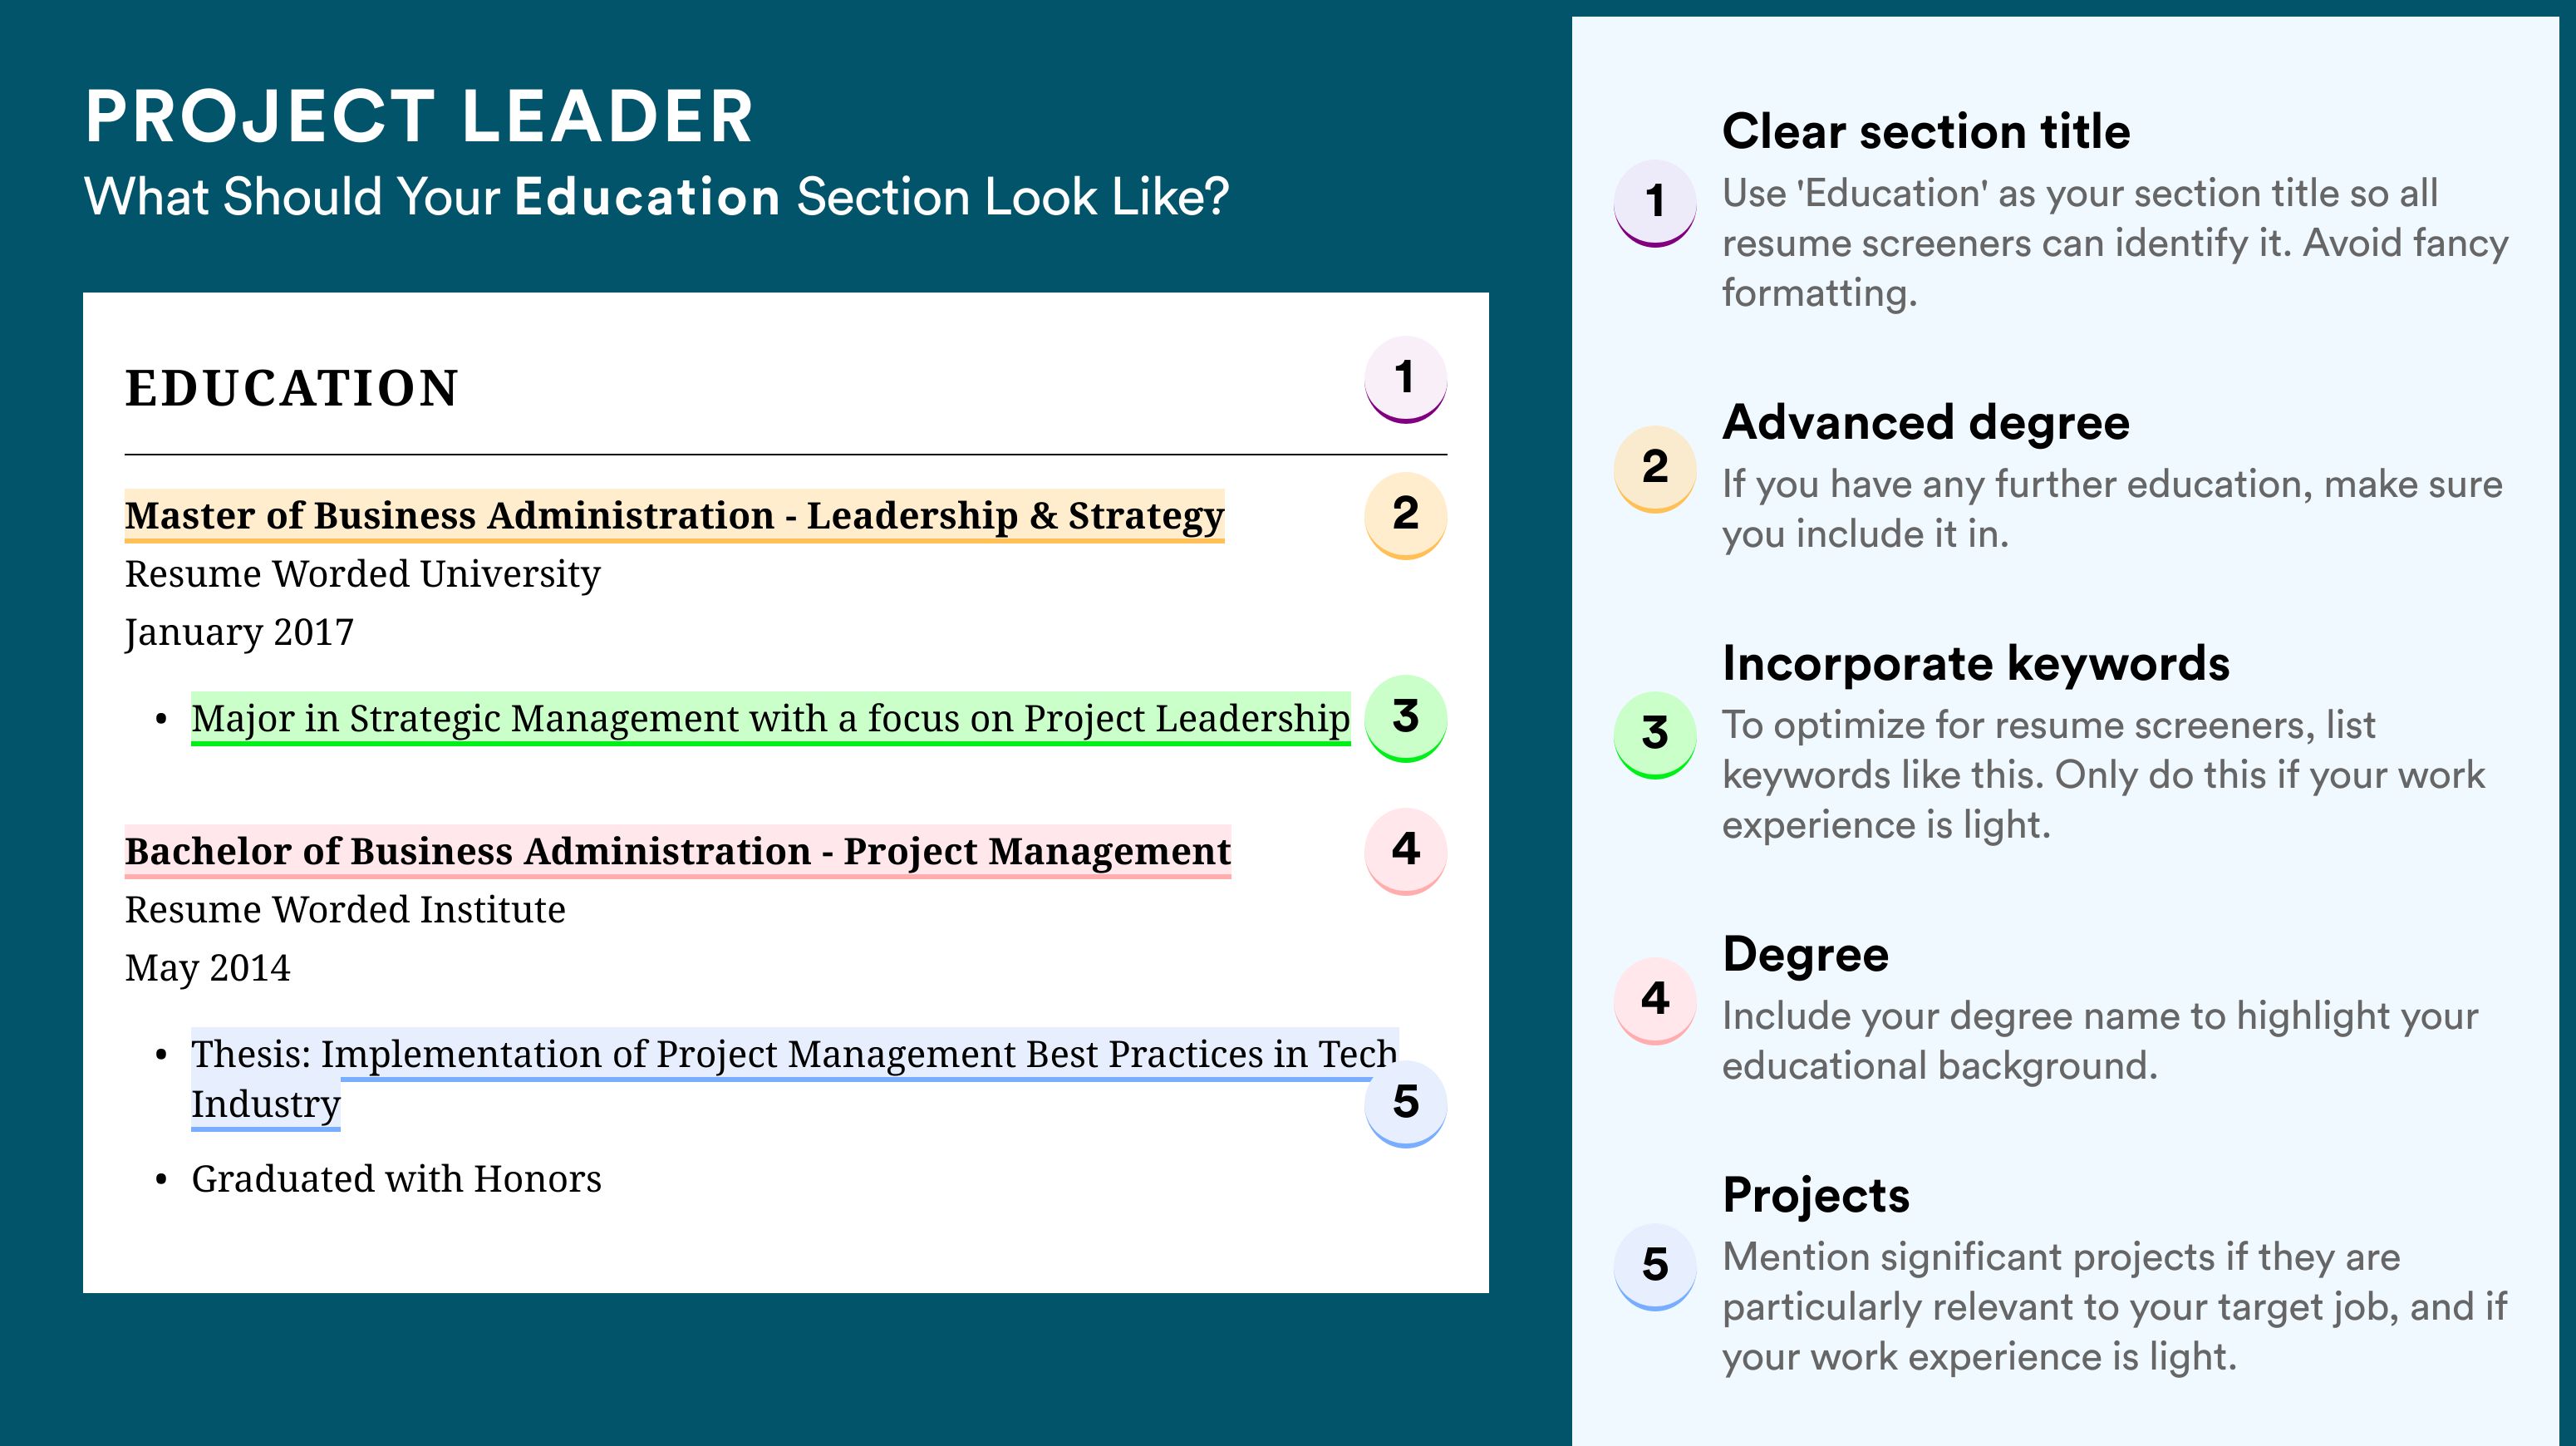 How To Write An Education Section - Project Leader Roles